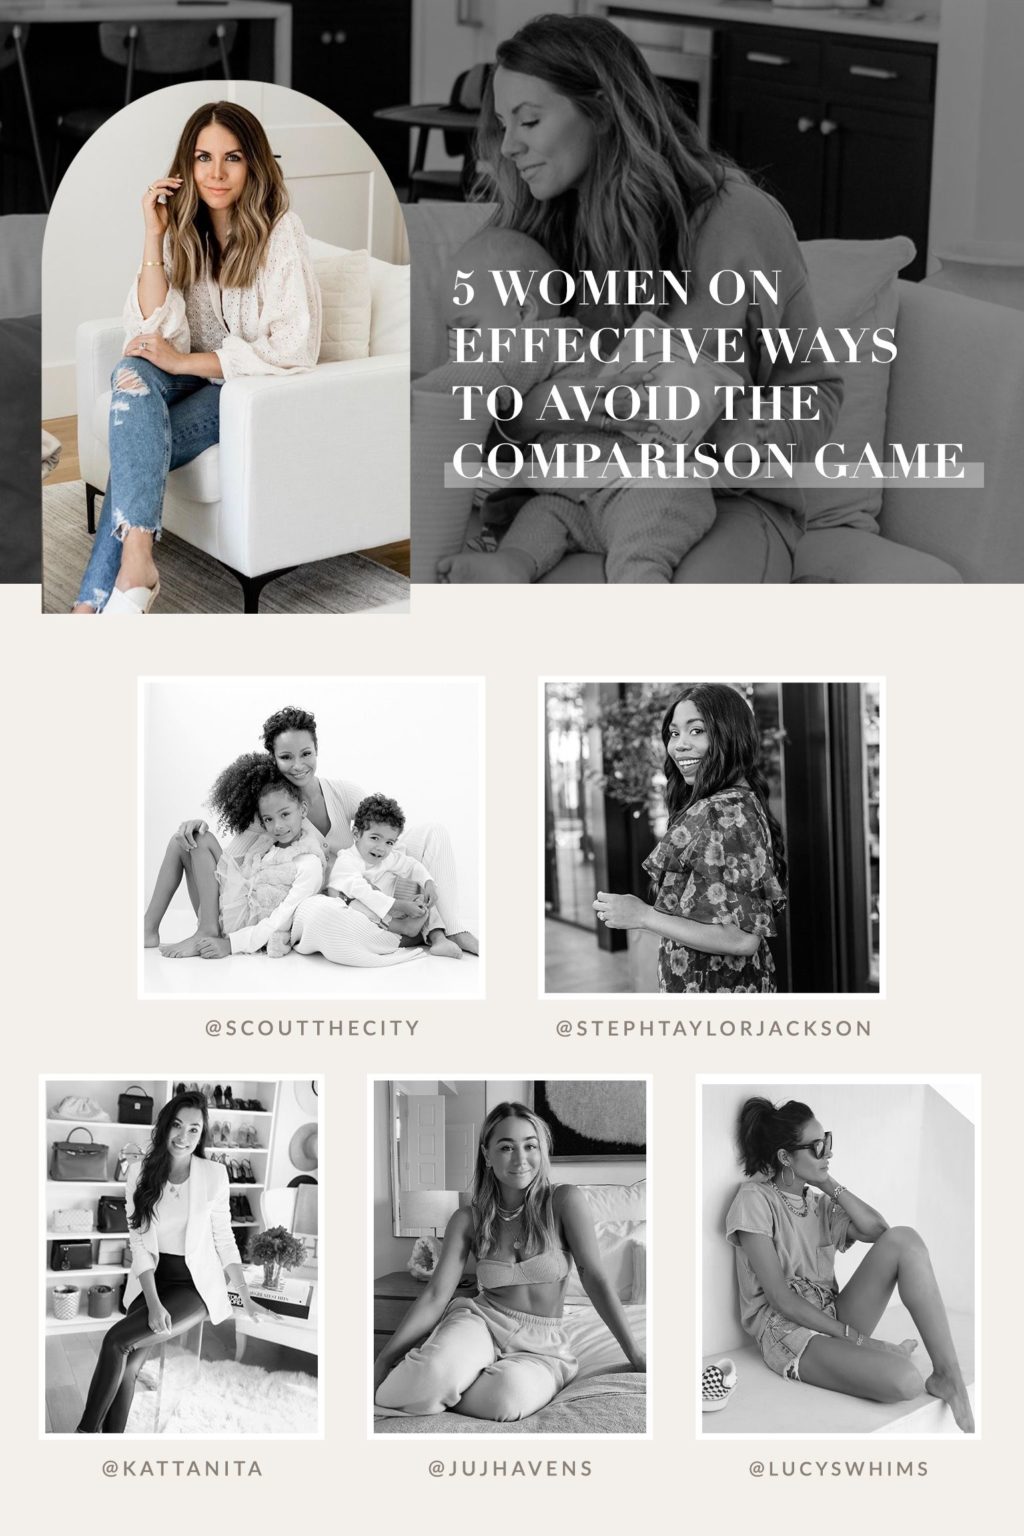 5 Women On Effective Ways to Avoid the Comparison Game